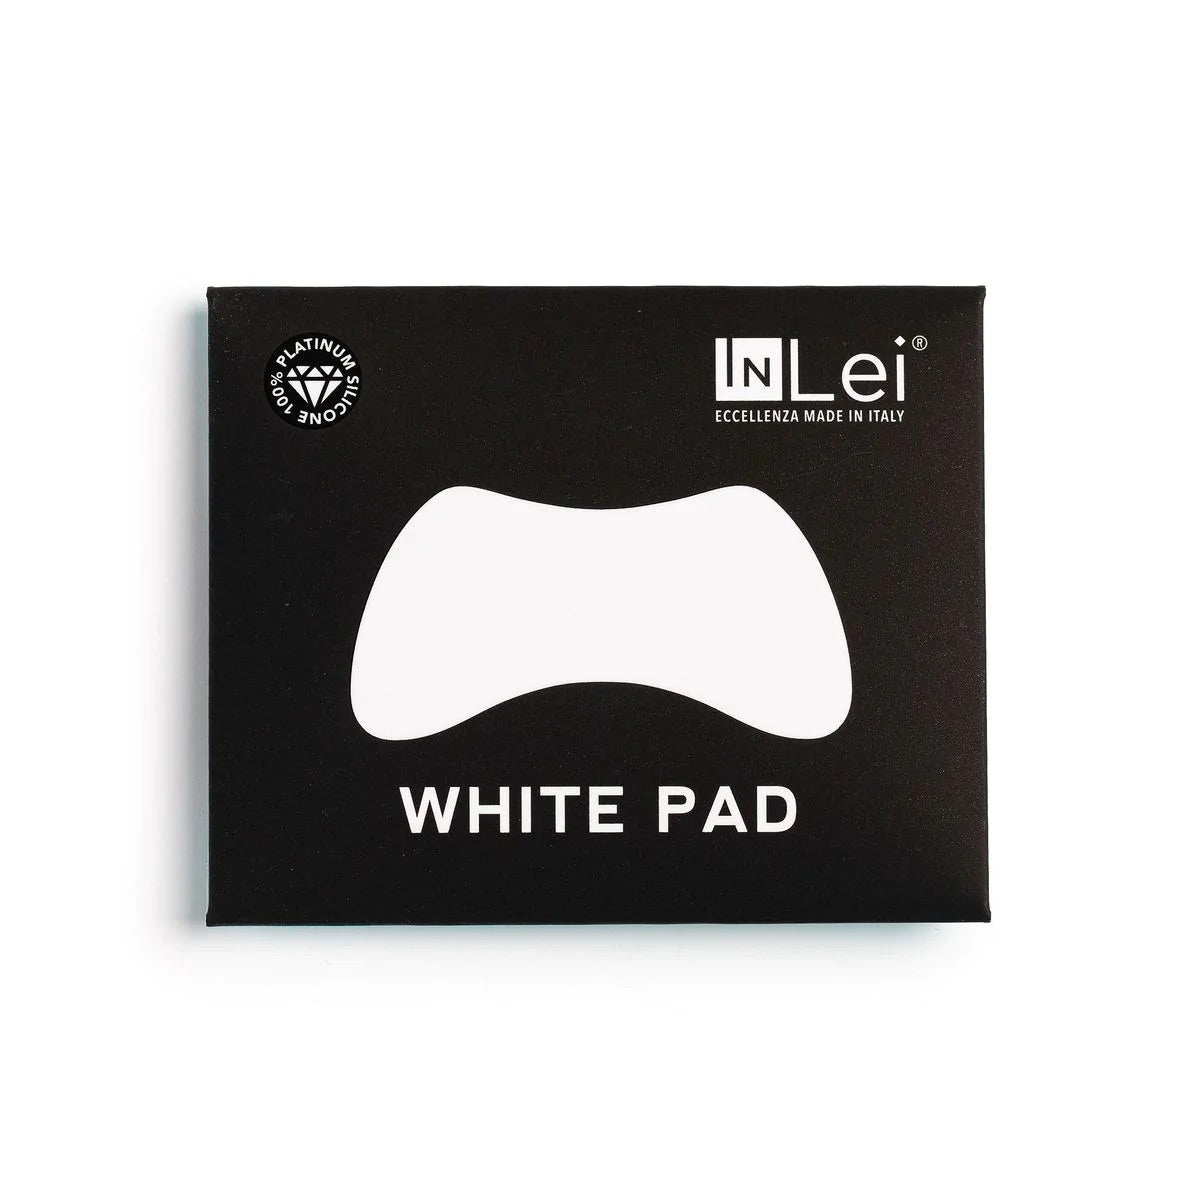 INLEI - Reusable Silicone Eye Pads White (1 pair) - Cosmetica Pro Store